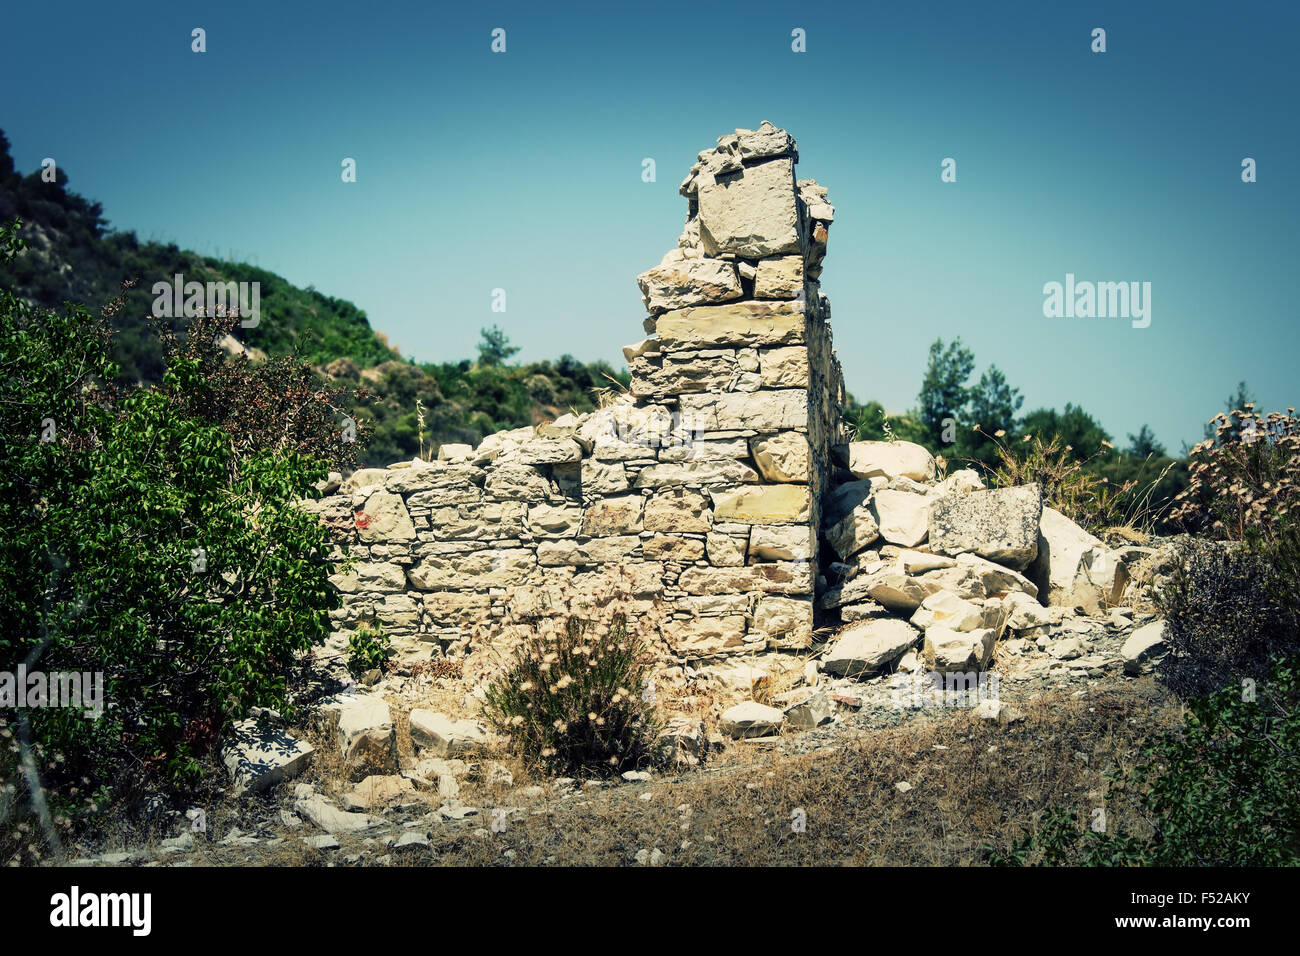 The ruins of an old house, Troodos, Cyprus Stock Photo